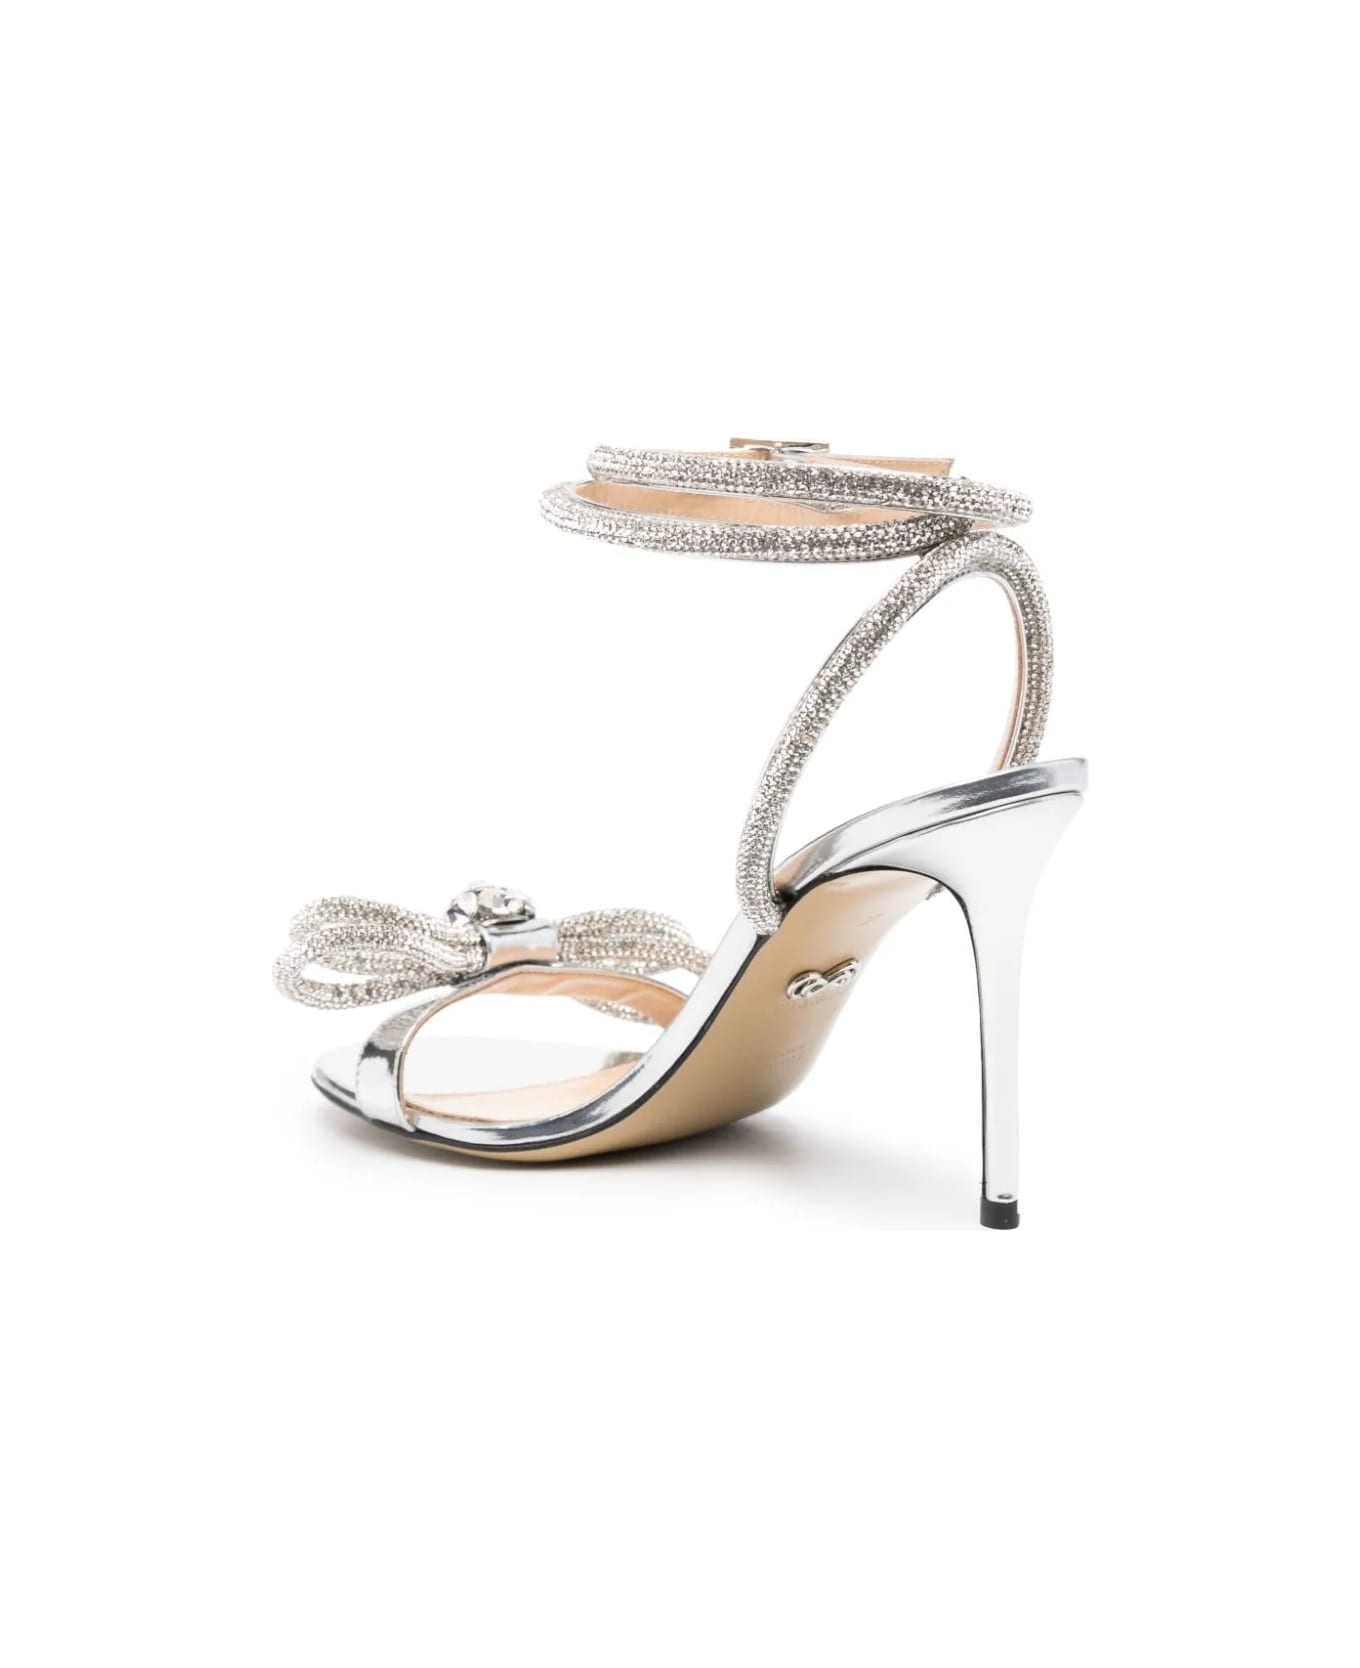 Mach & Mach Double Bow 100 Mm Sandals In Silver Metallic Leather With Crystals - Silver